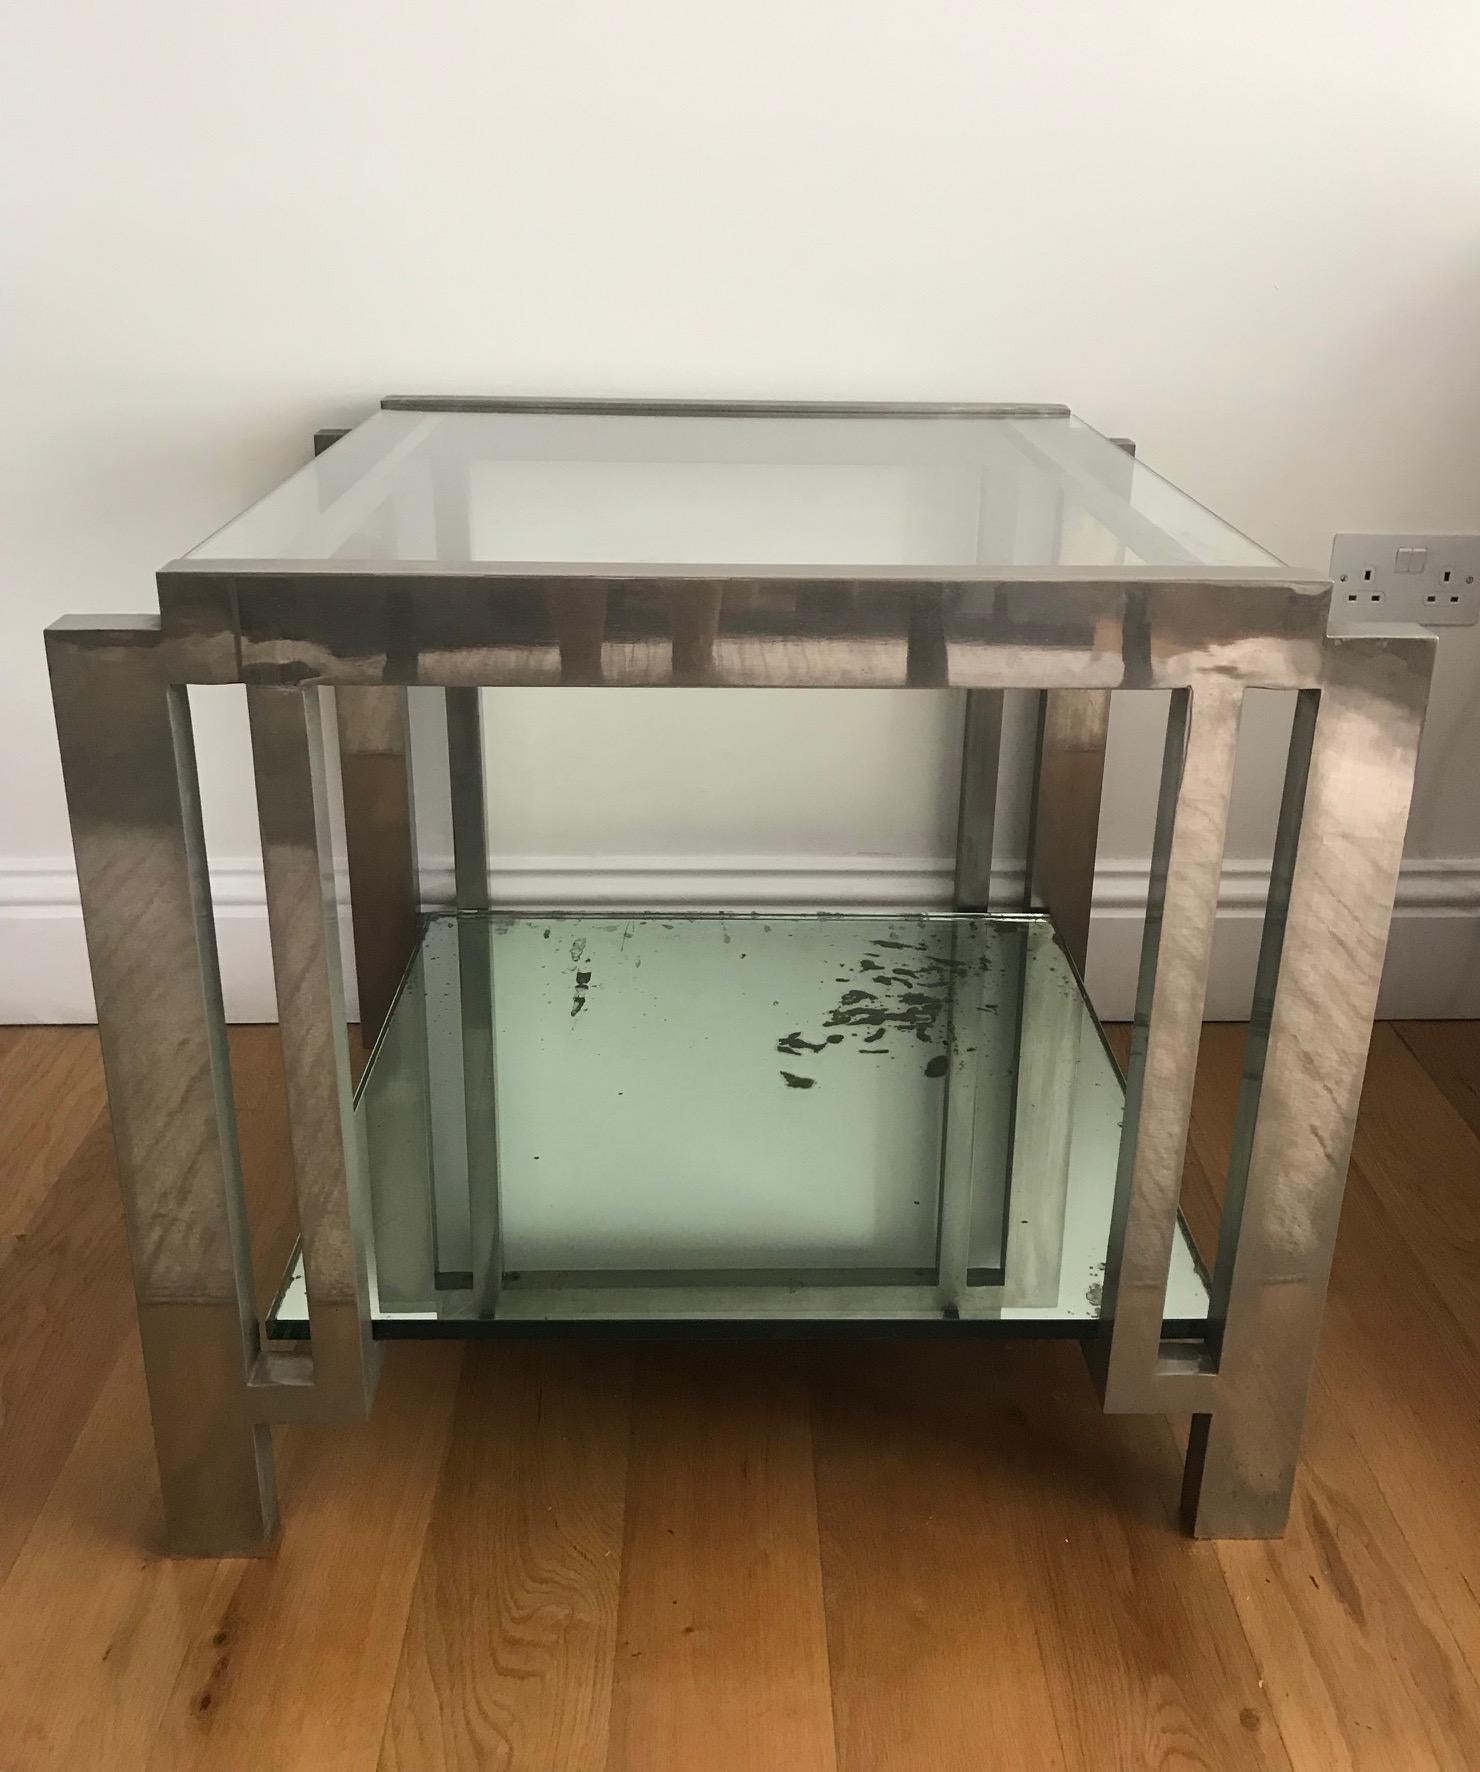 Fabulous French 1950s Nickel and glass side table in the style of Jacques Adnet. Of excellent quality and design. Some damage to the mirrored bottom shelf. (Chip off corner and foxing).